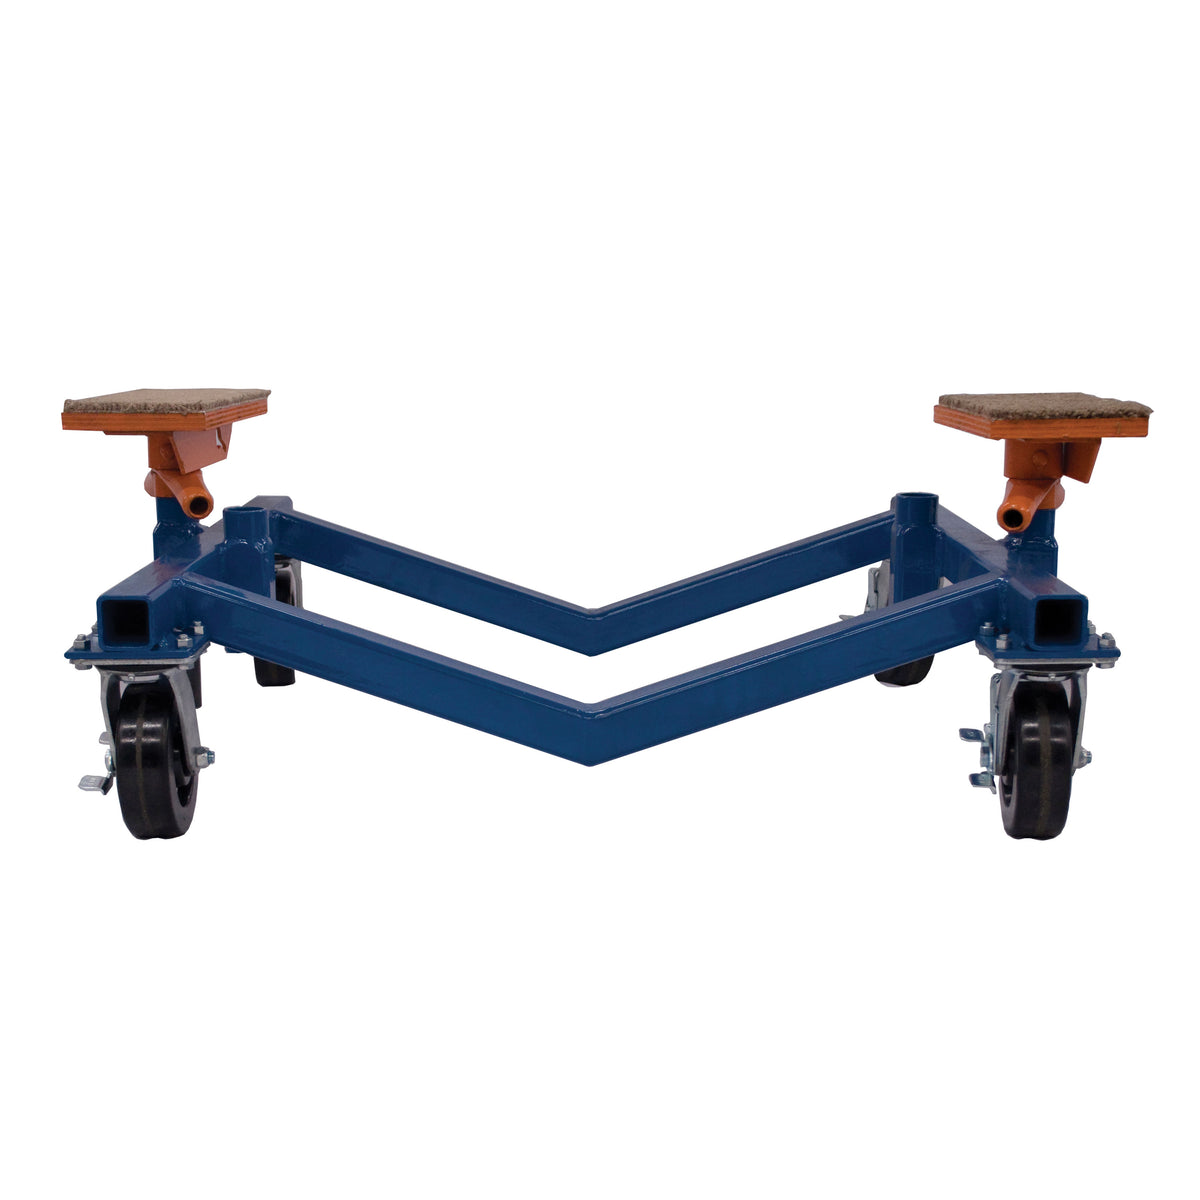 Brownell Boat Stands BD2 Heavy-Duty Steel Boat Dolly - 8,000 lbs.